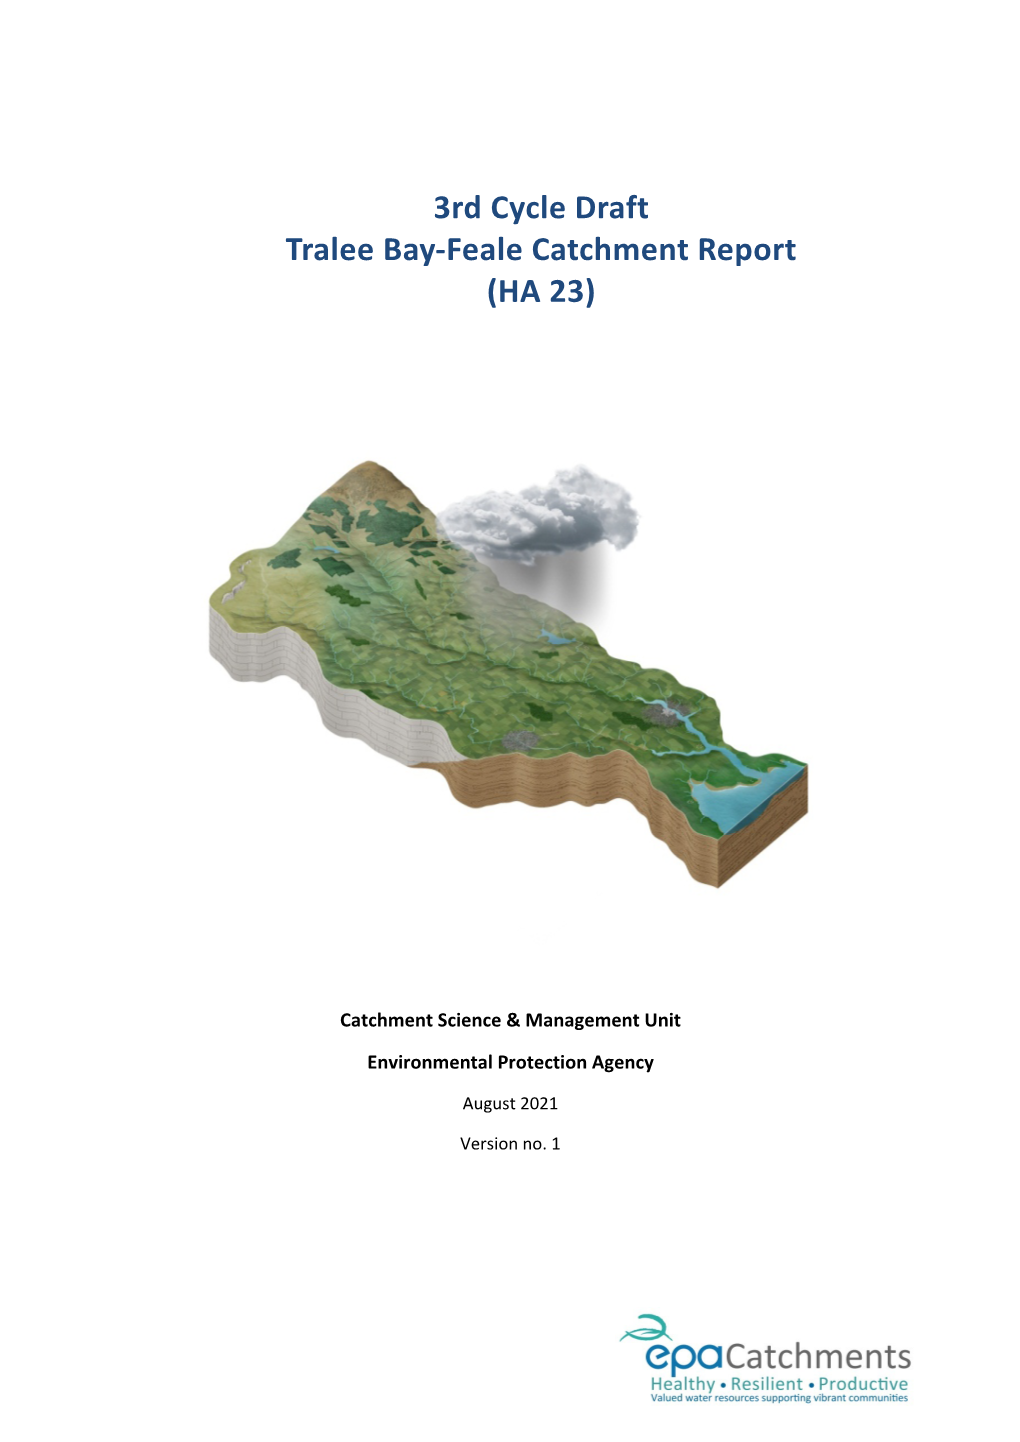 Tralee Bay-Feale Catchment Report (HA 23)